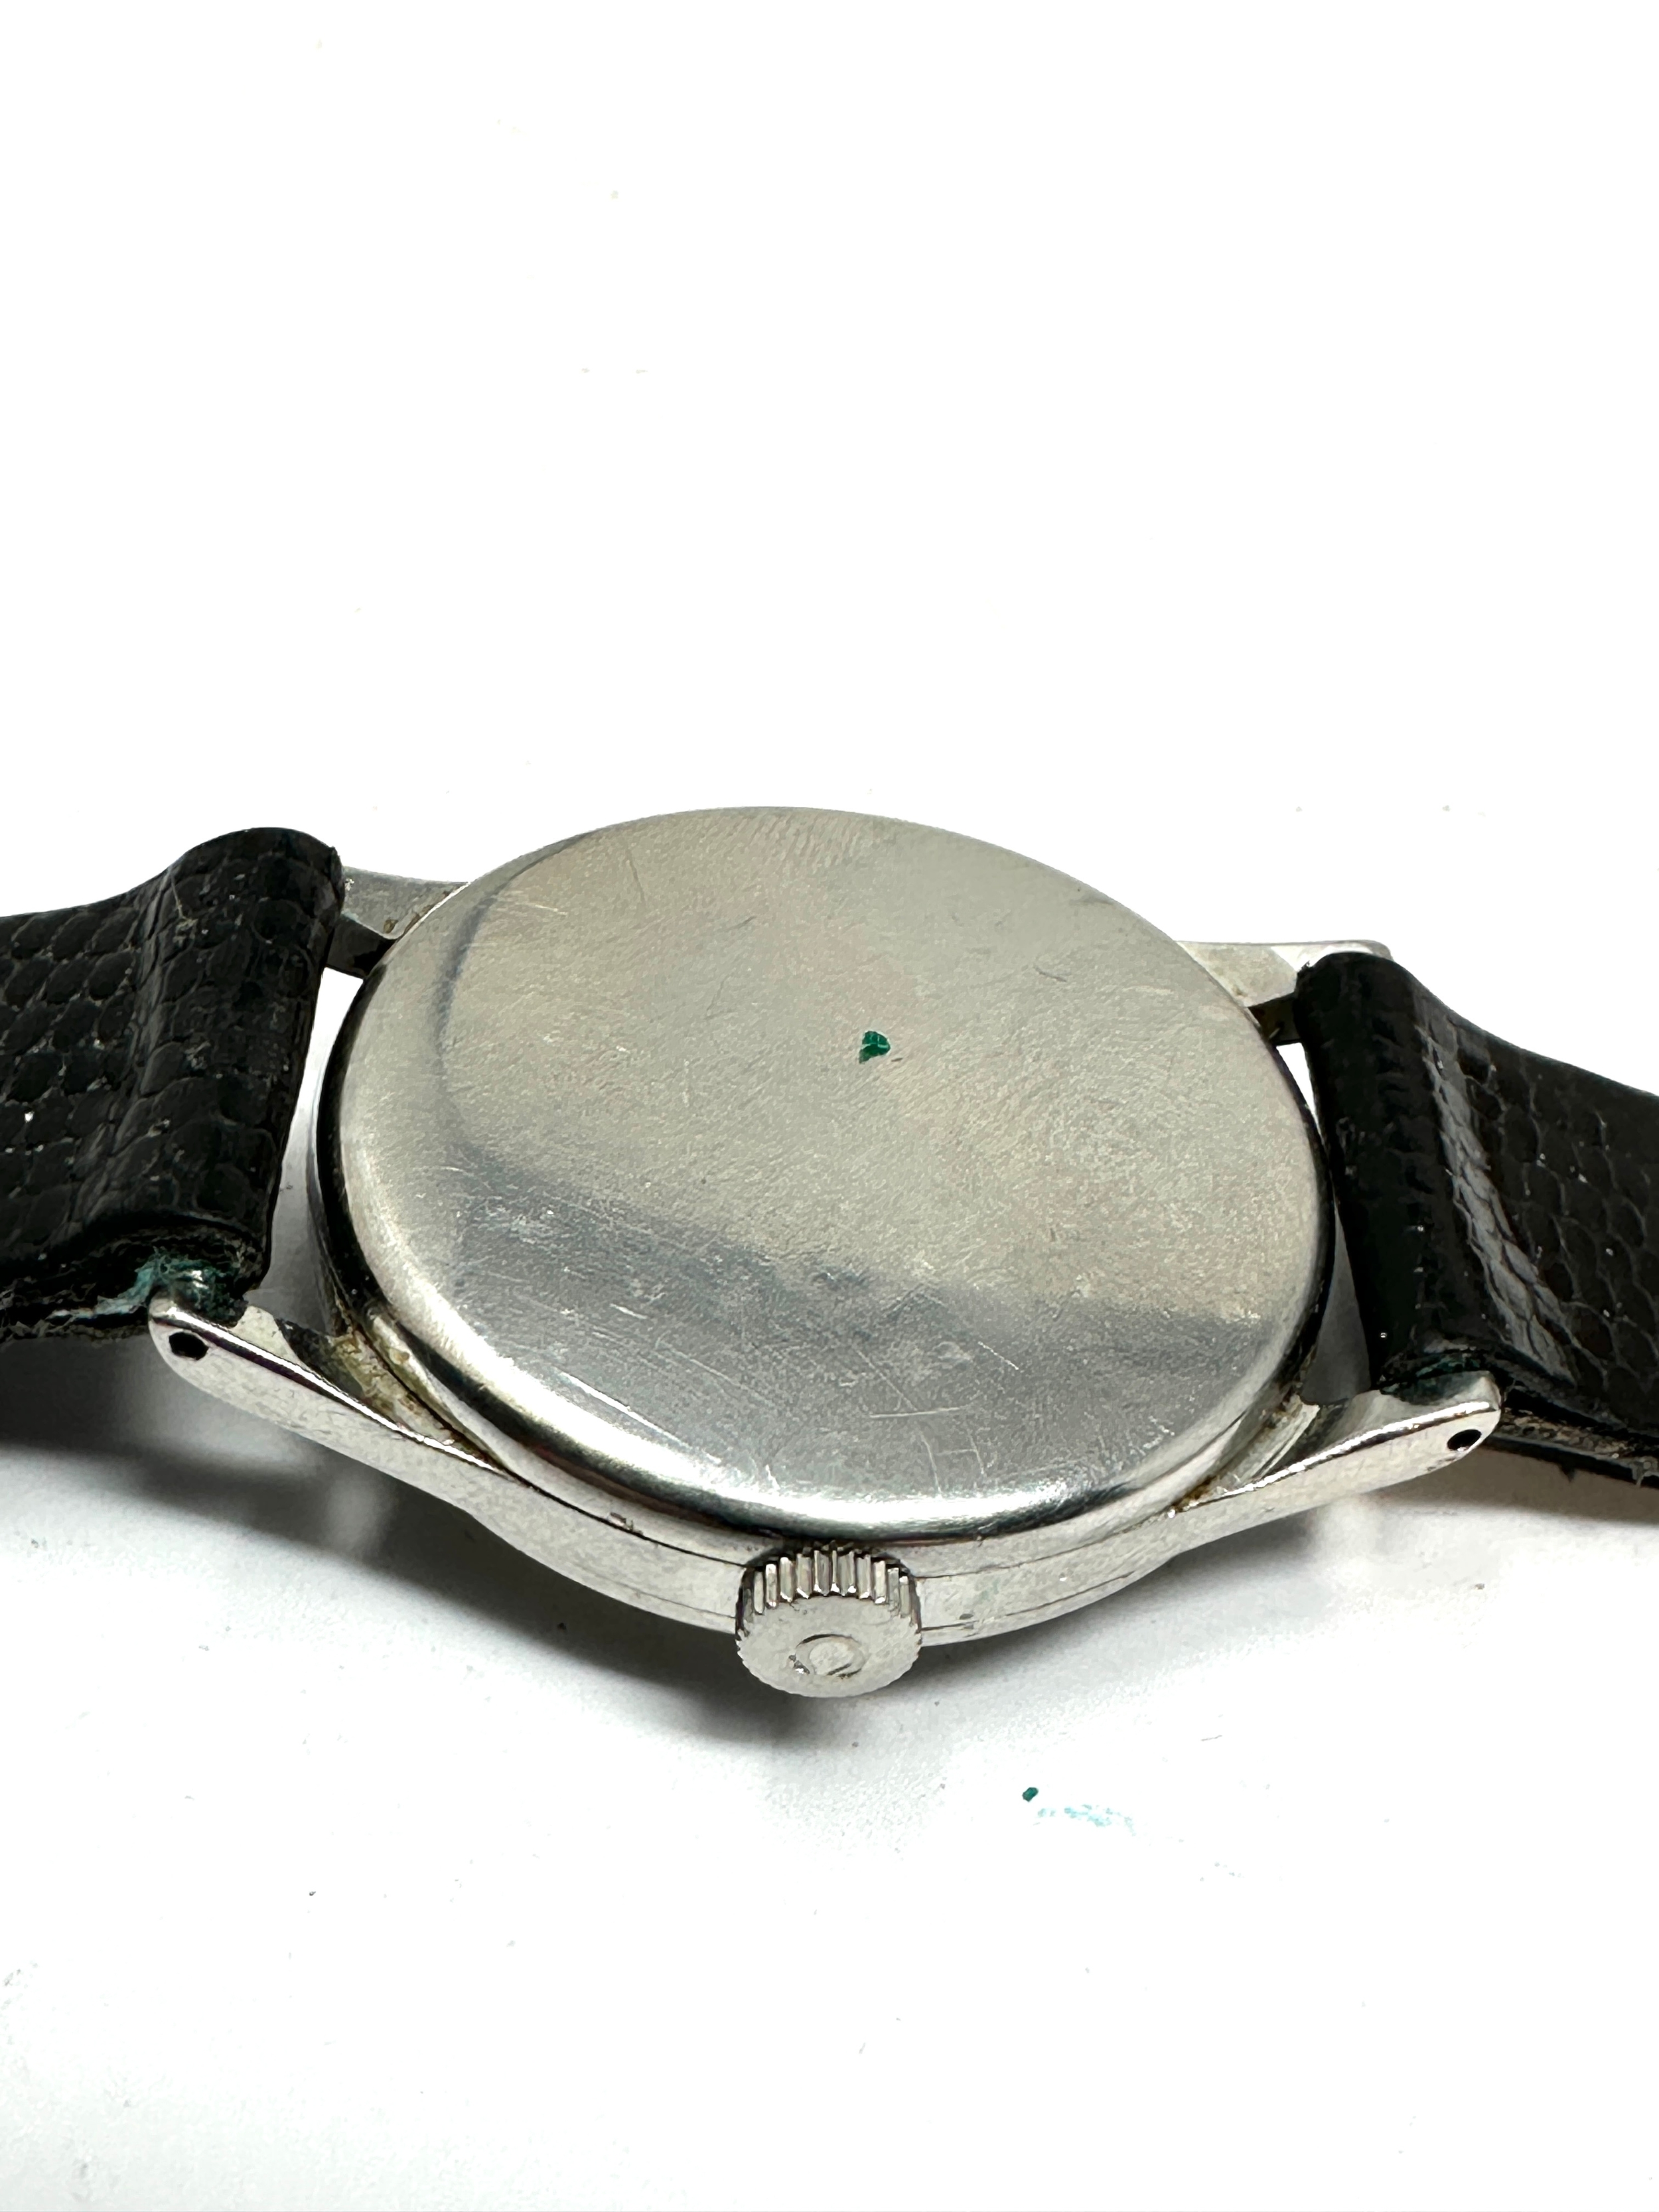 Vintage Omega manual wind gents wristwatch cal 266 steel cased crack to glass the watch is ticking - Image 5 of 5